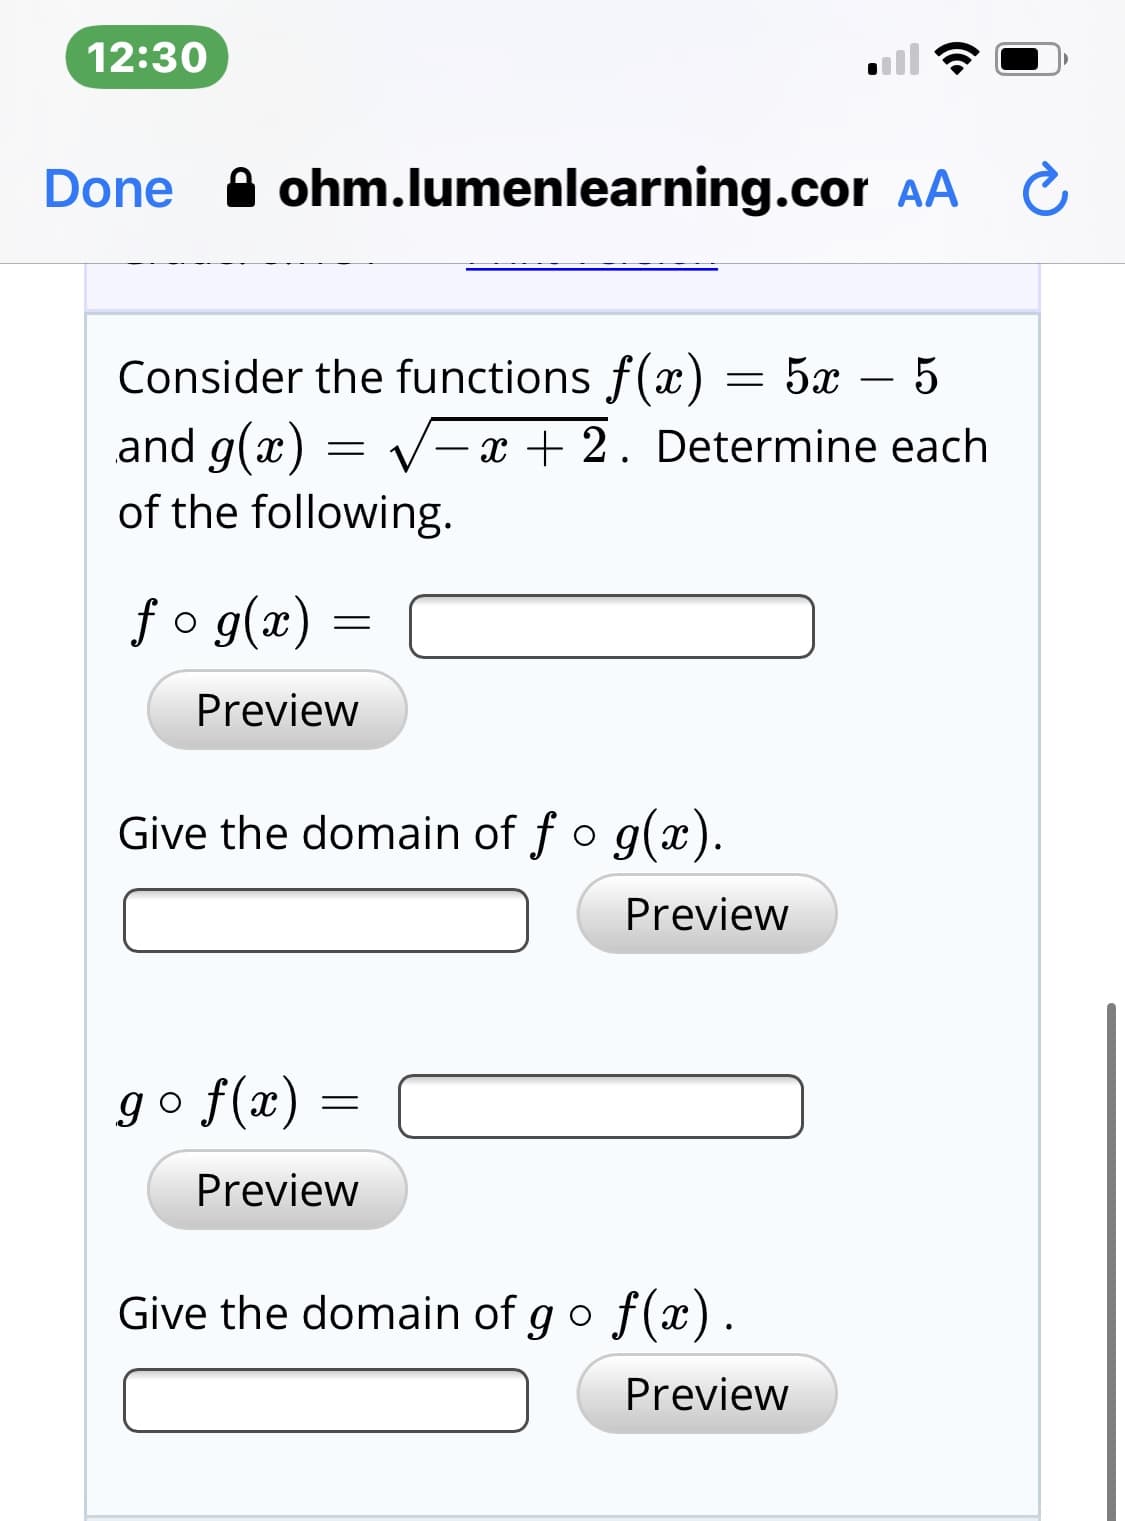 12:30
Done A ohm.lumenlearning.cor AA C
Consider the functions f(x) = 5x –
and g(x) = V-x + 2. Determine each
of the following.
fo g(x) =
Preview
Give the domain of fo g(x).
Preview
go f(x) =
Preview
Give the domain of go f(x).
Preview
